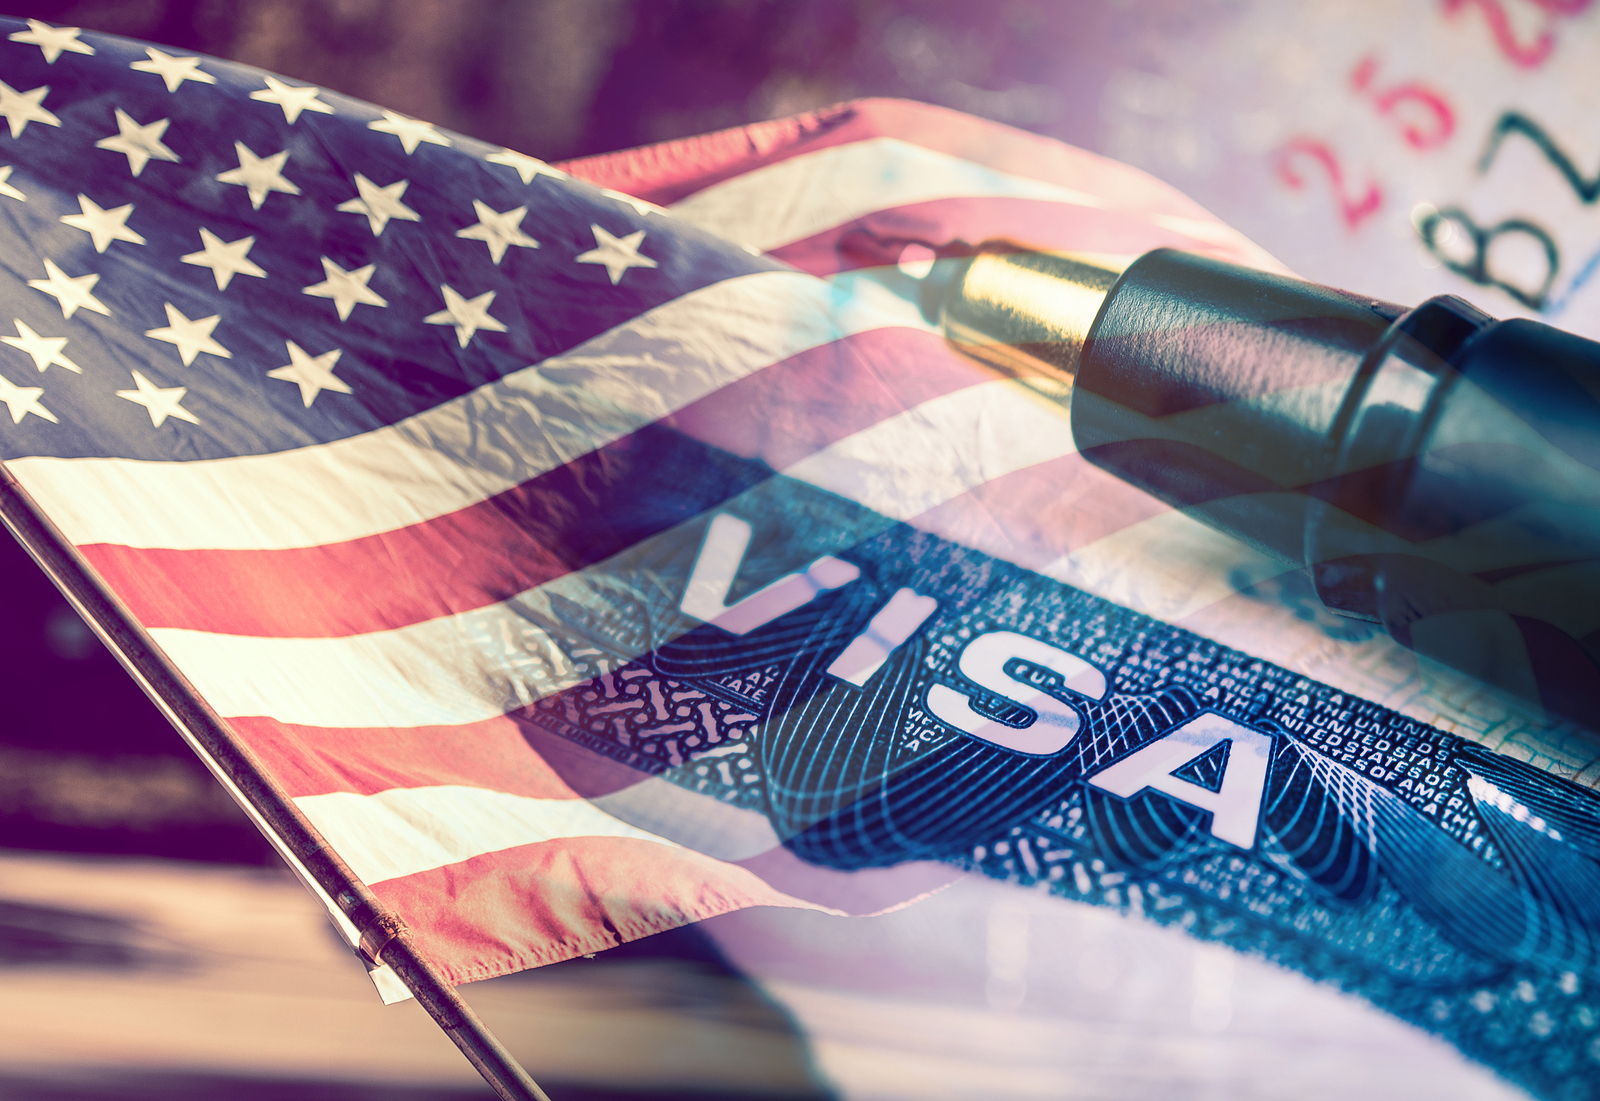 How Do T Visas Provide a Lifeline for Victims of Human Trafficking in the U.S.?